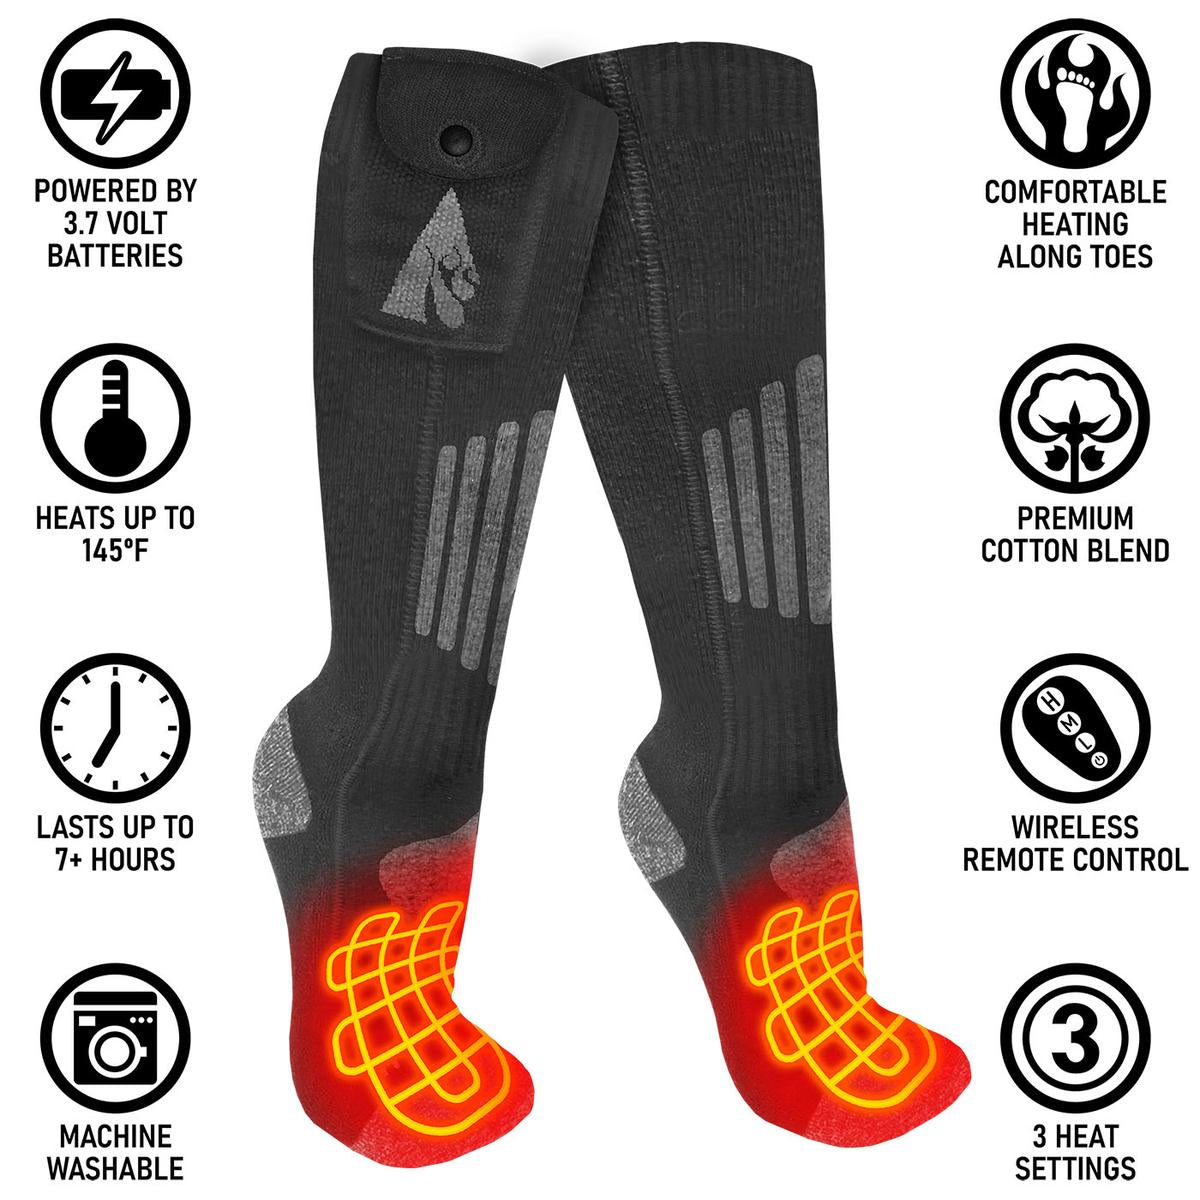 Dr.Warm 7V Wireless Heated Socks with Remote Control - My Cooling